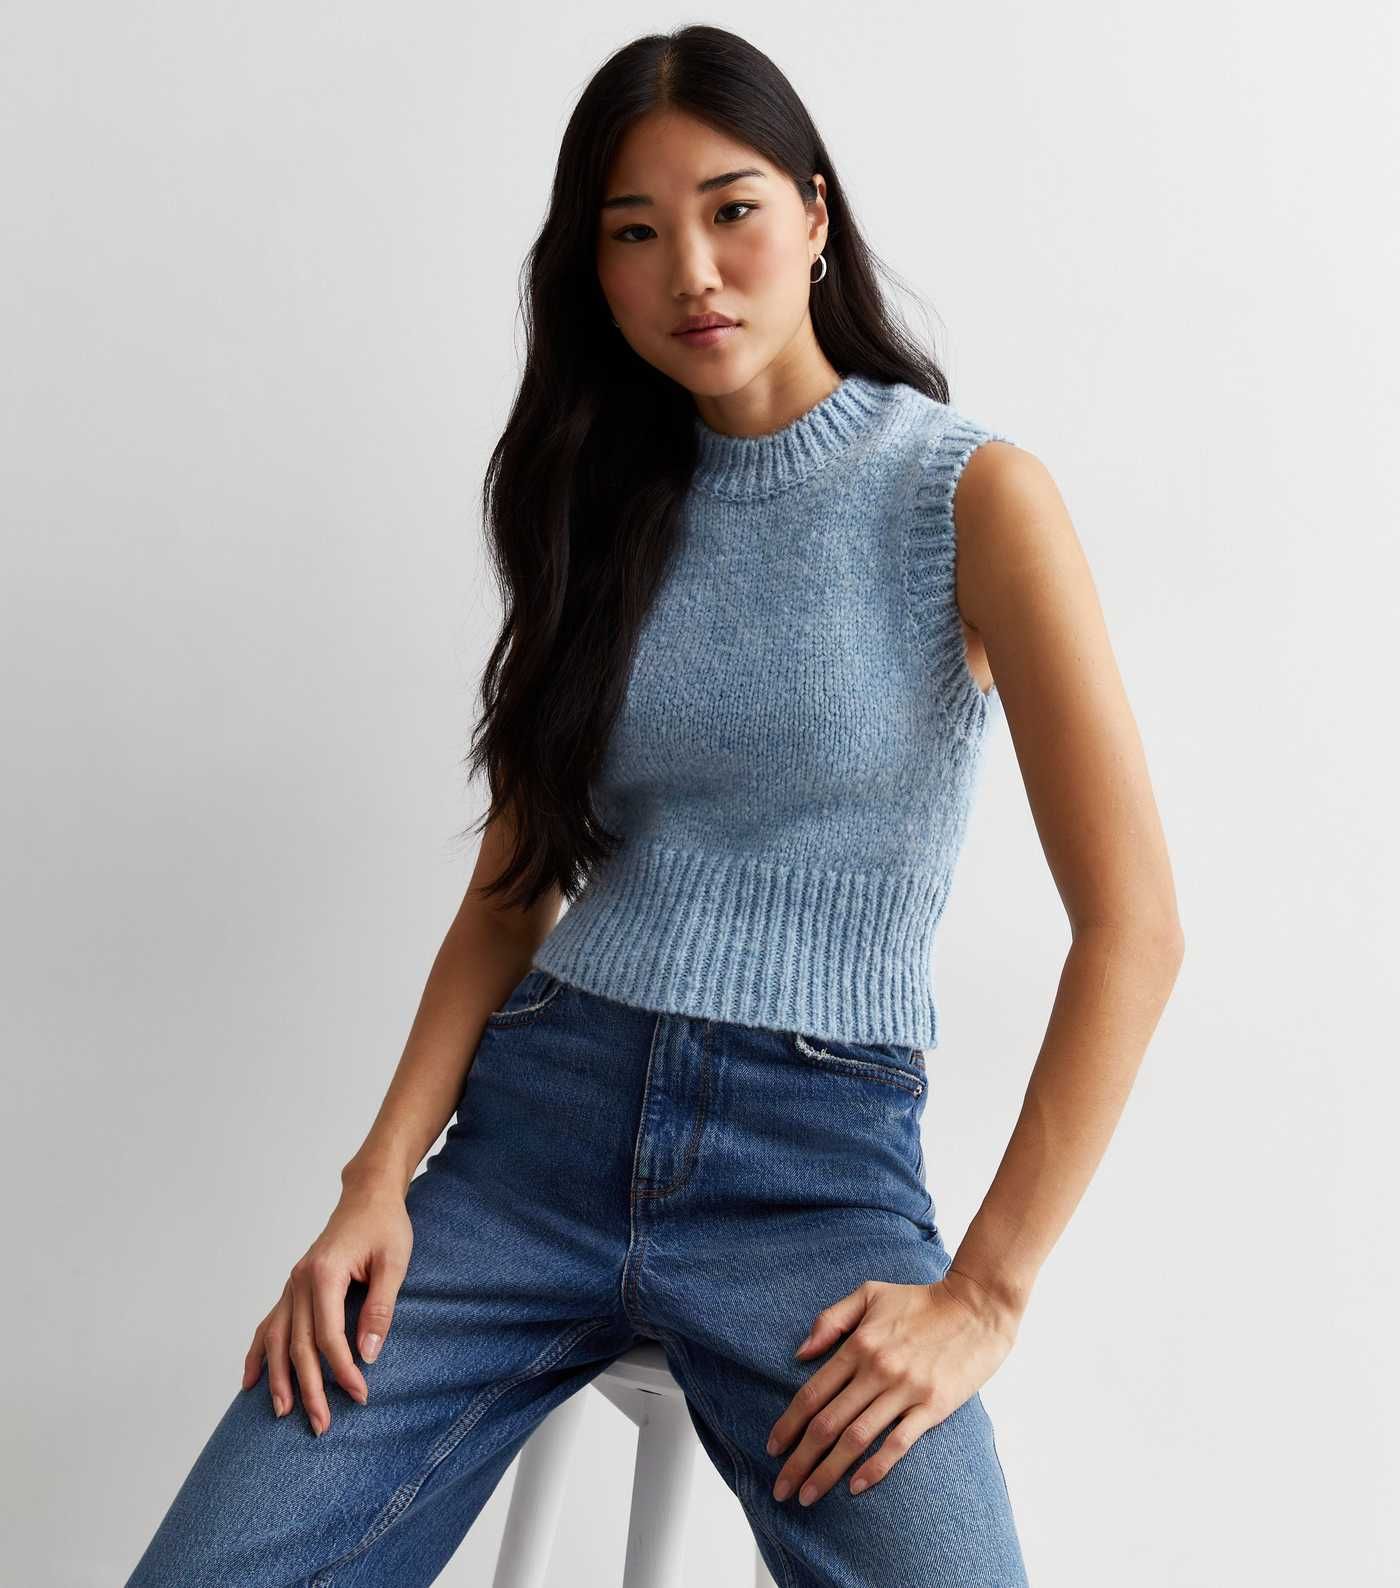 Blue Knit Crop Vest
						
						Add to Saved Items
						Remove from Saved Items | New Look (UK)